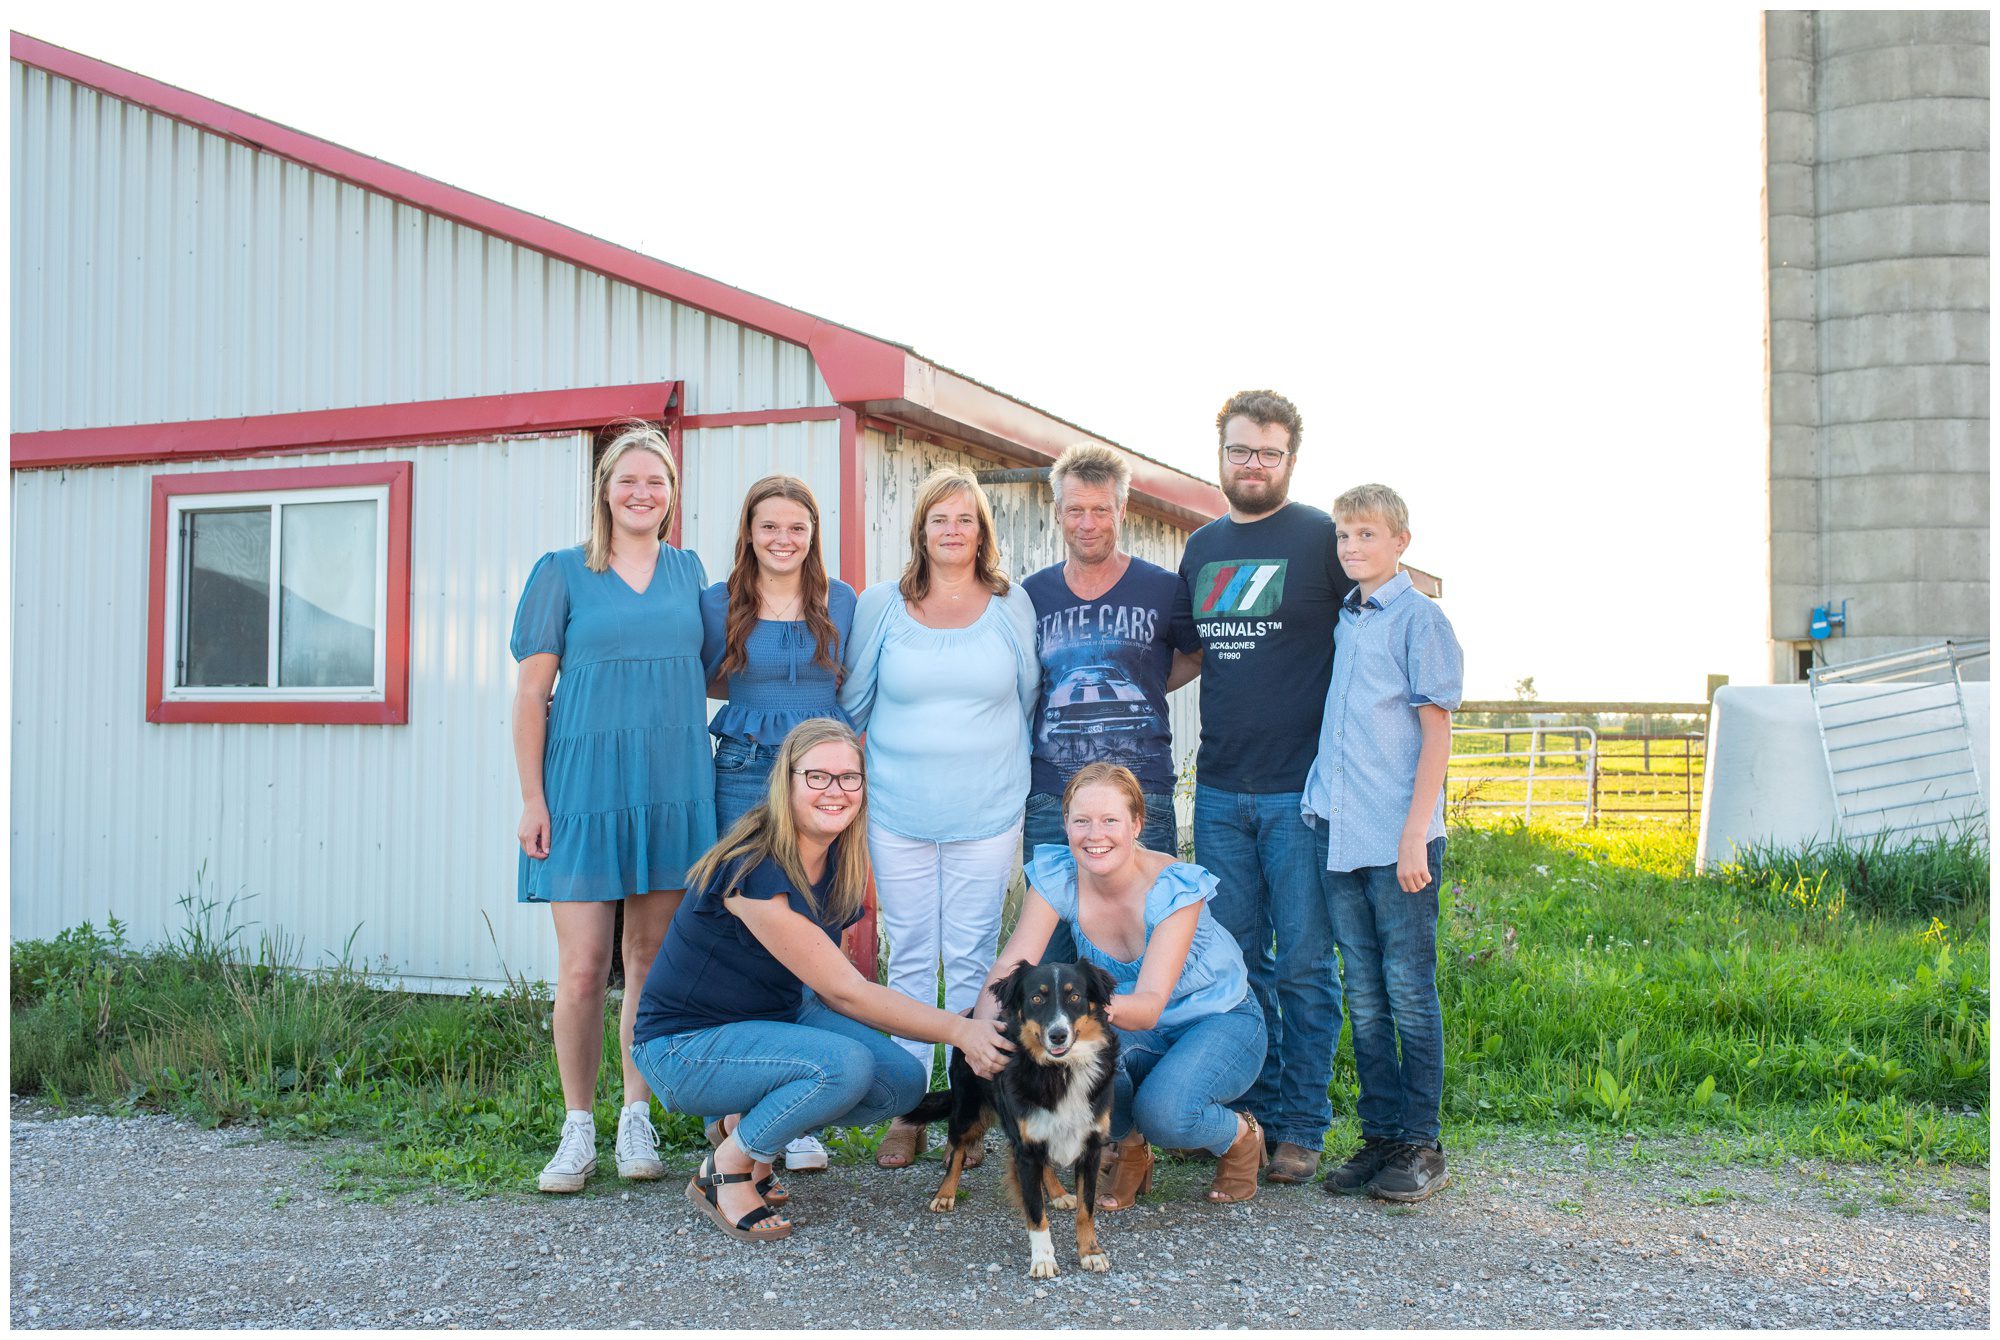 Family together on their farm with their dog